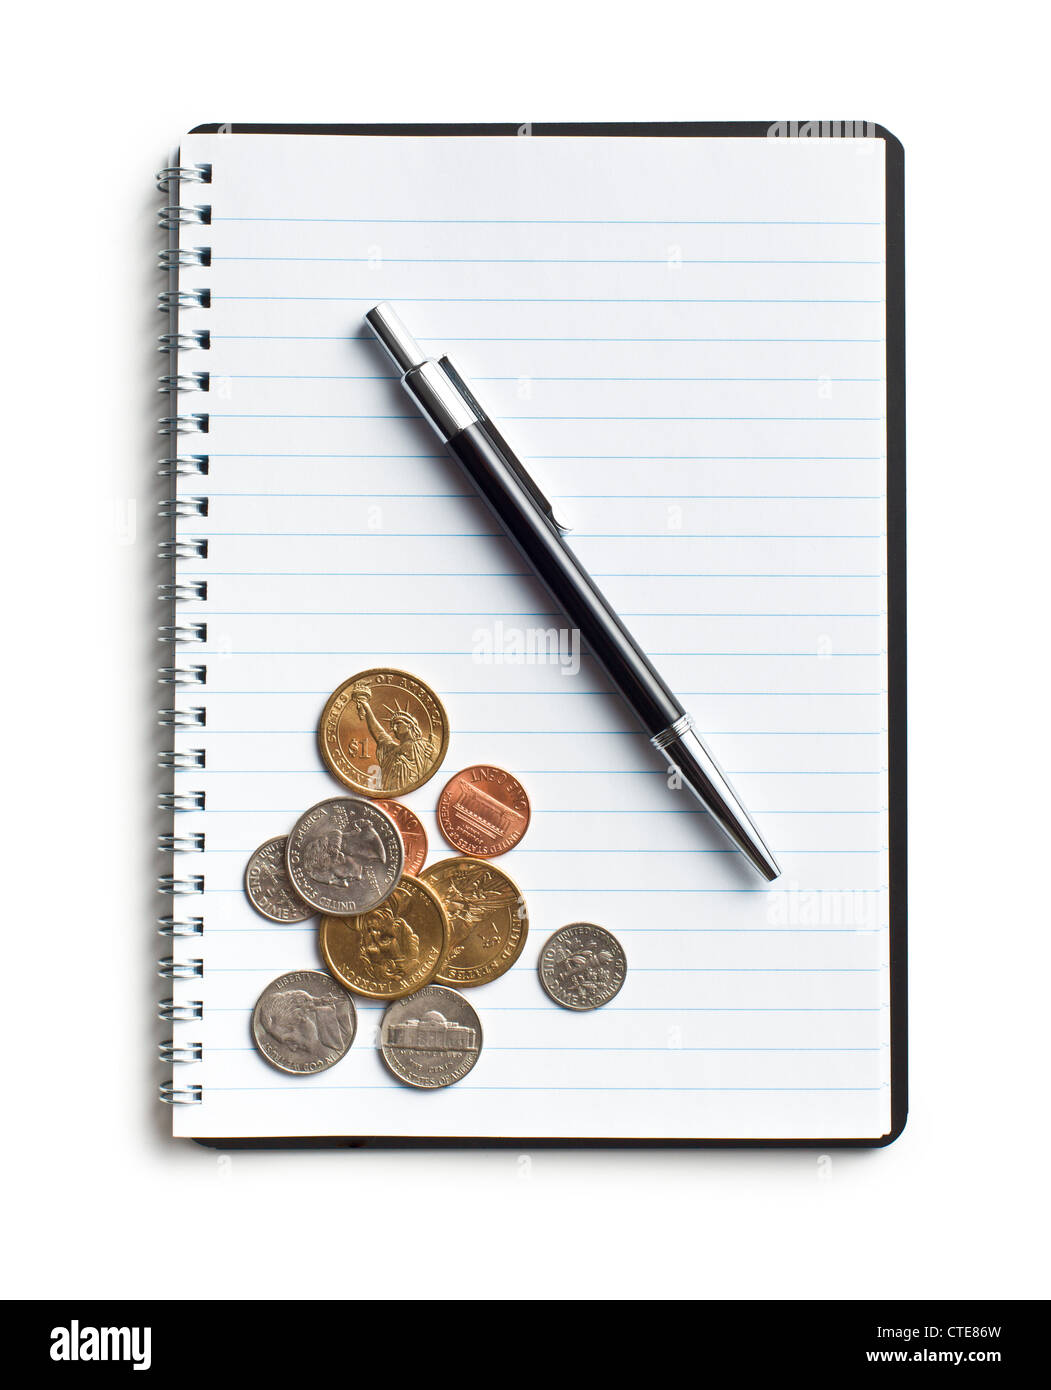 american coins and pen on blank notebook Stock Photo